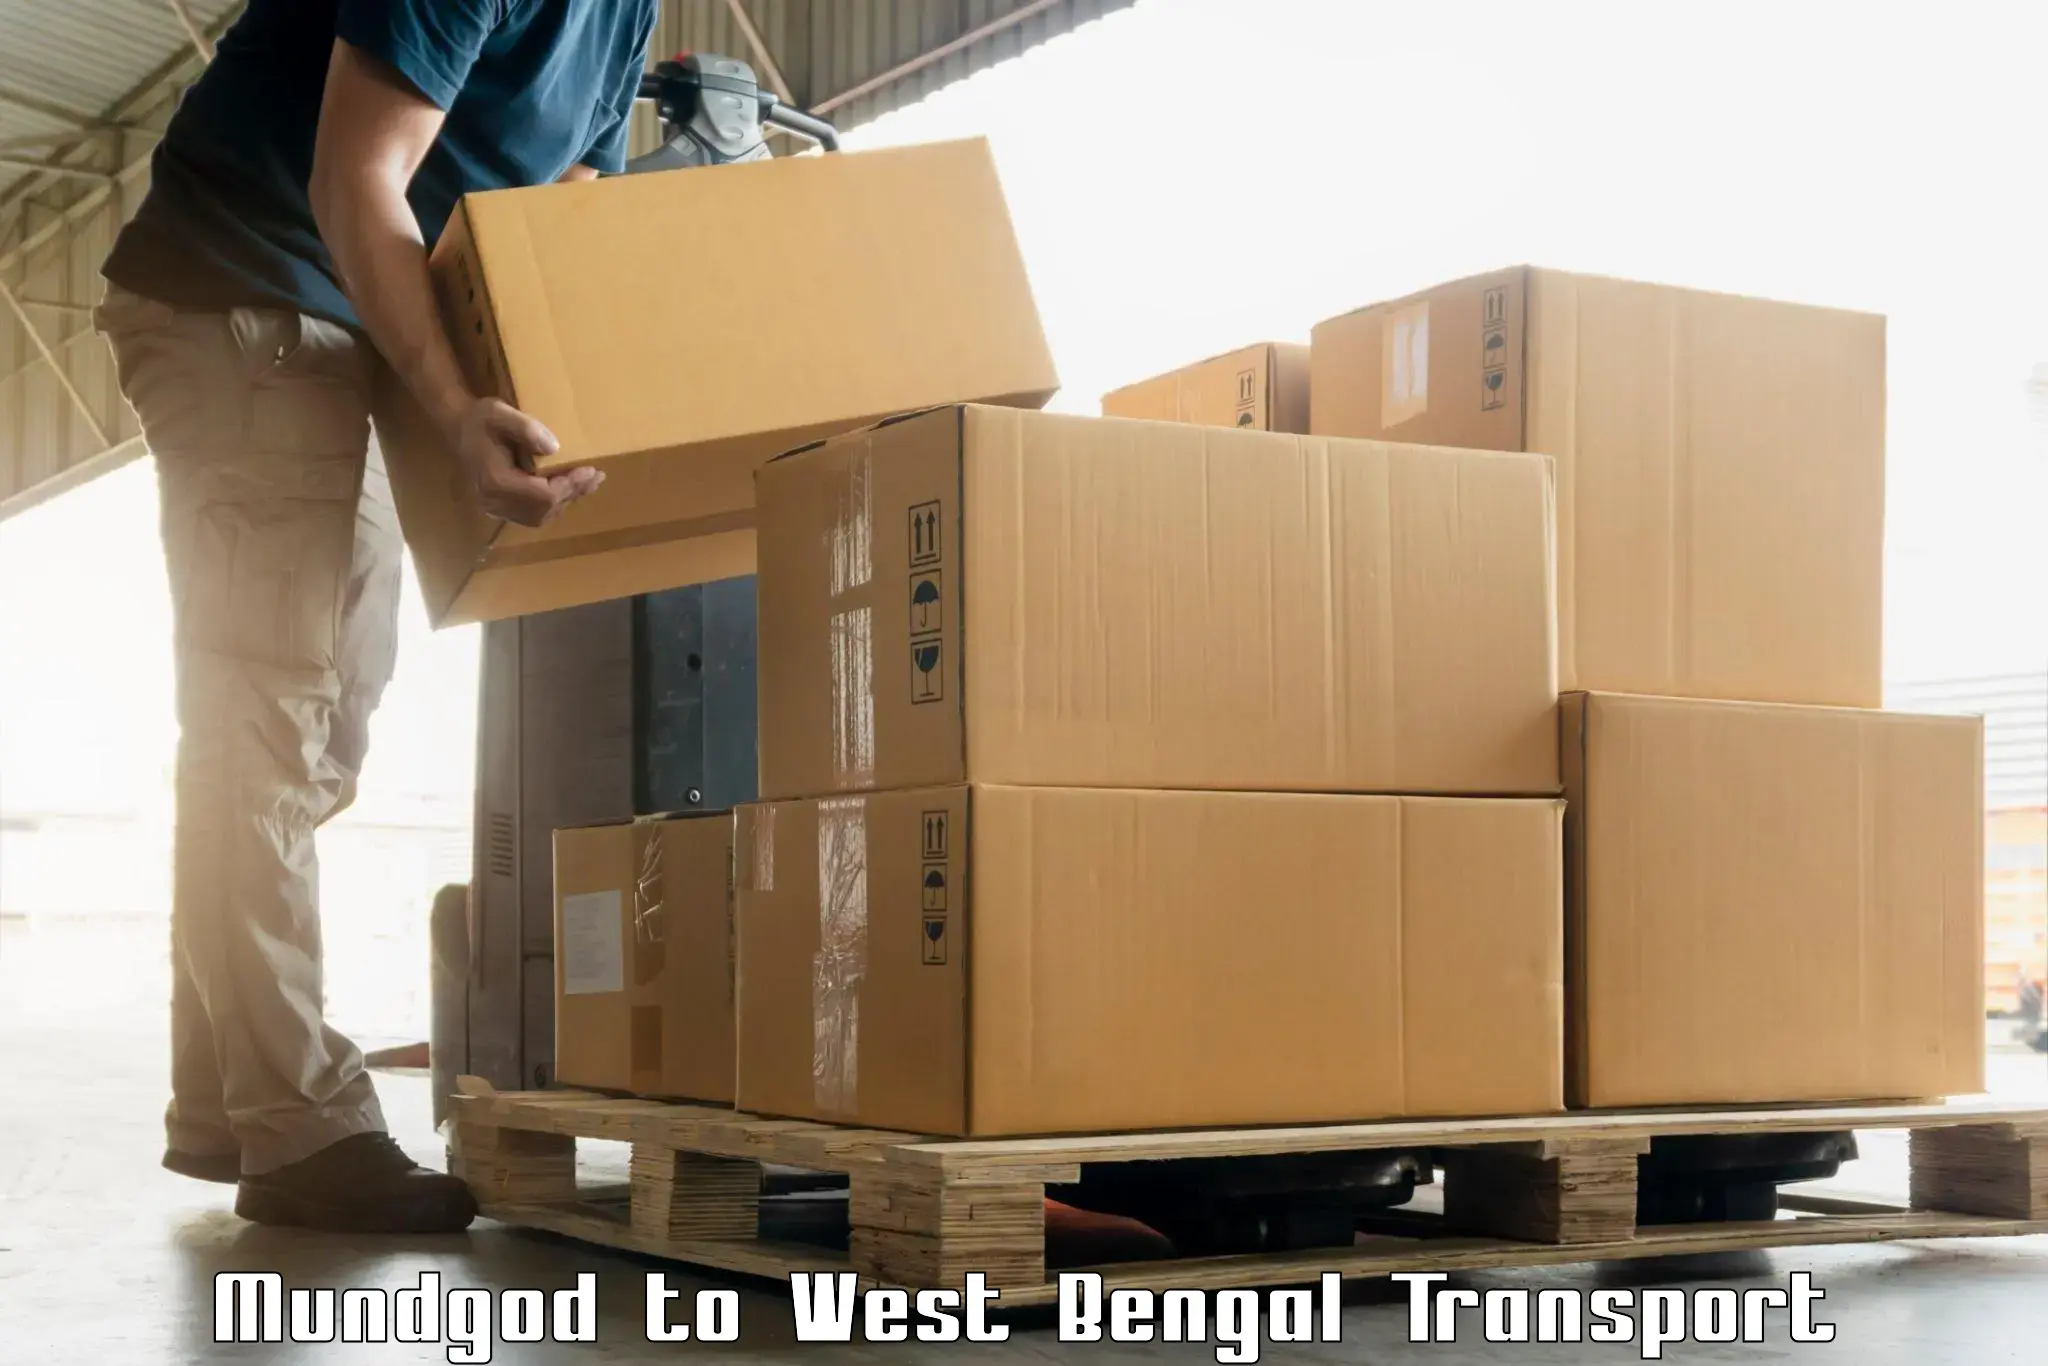 Delivery service Mundgod to West Bengal